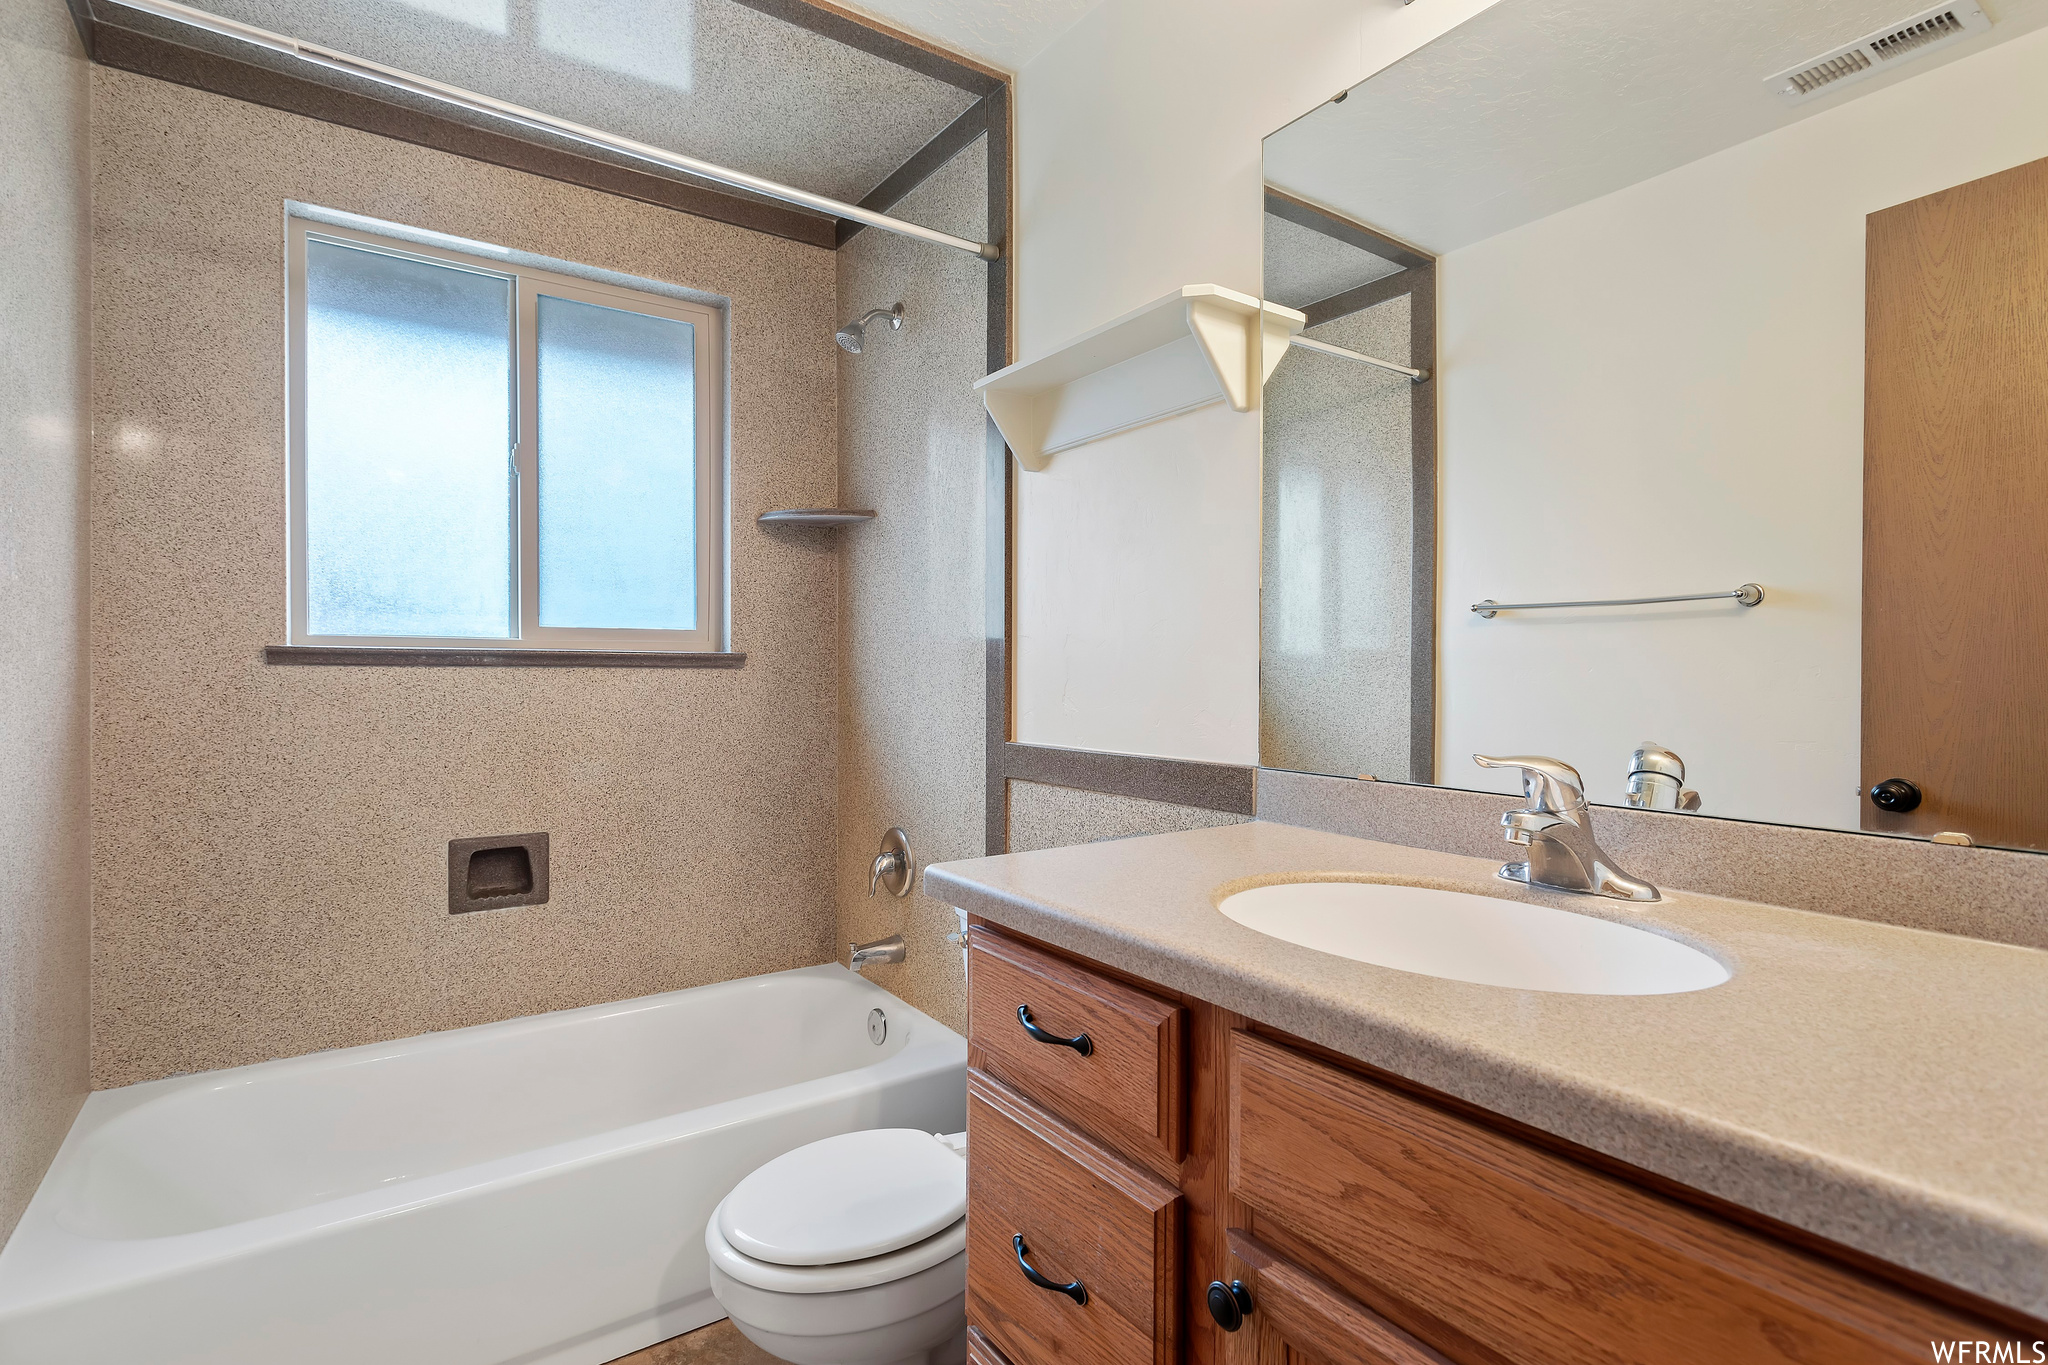 Full bathroom with toilet, bathing tub / shower combination, and vanity with extensive cabinet space